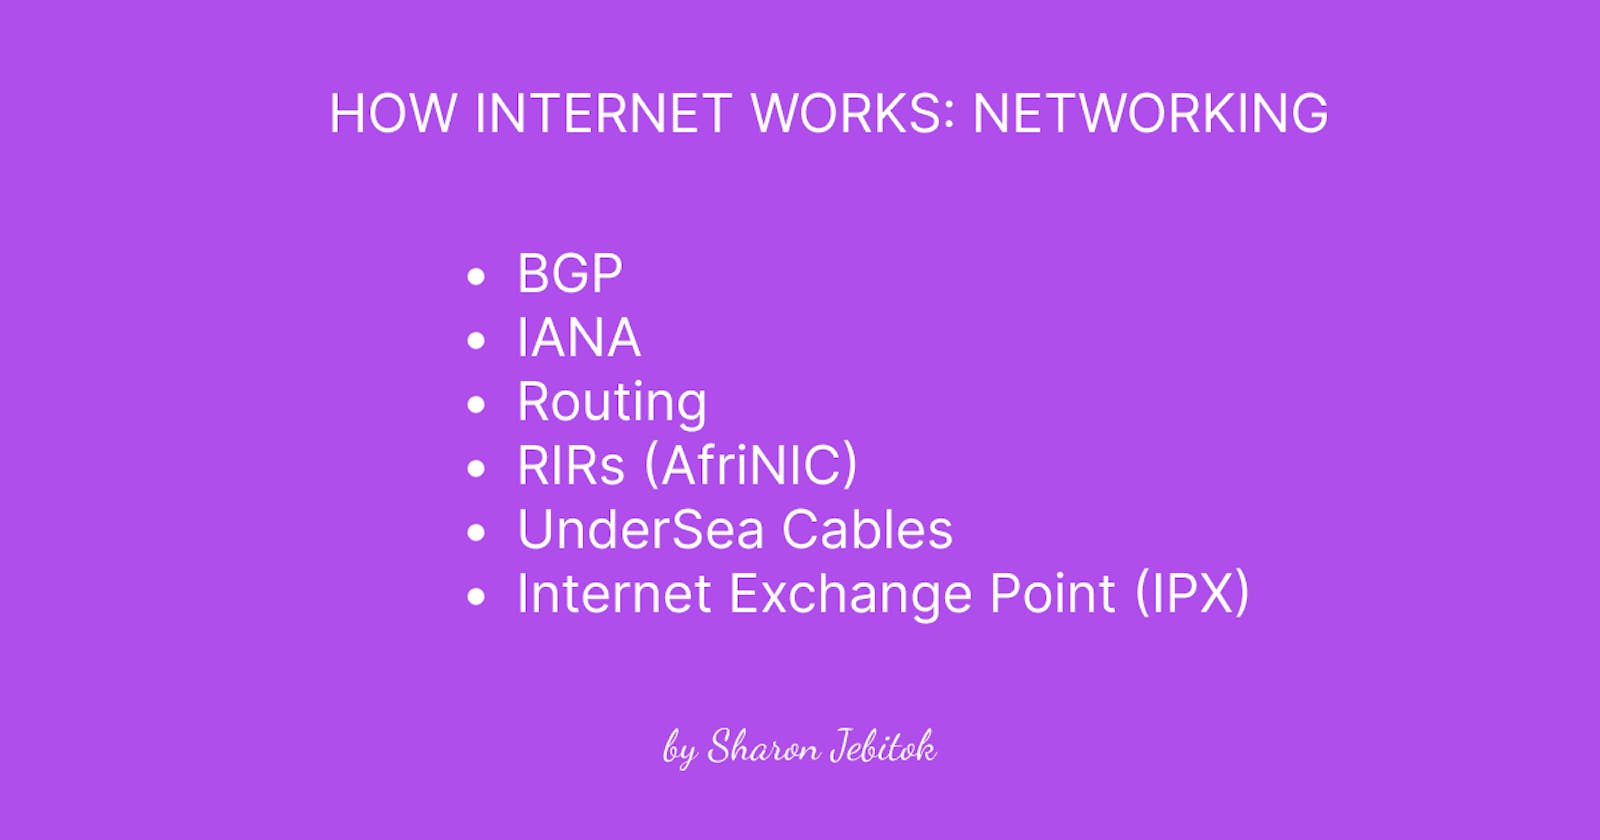 How the Internet Works: Networking